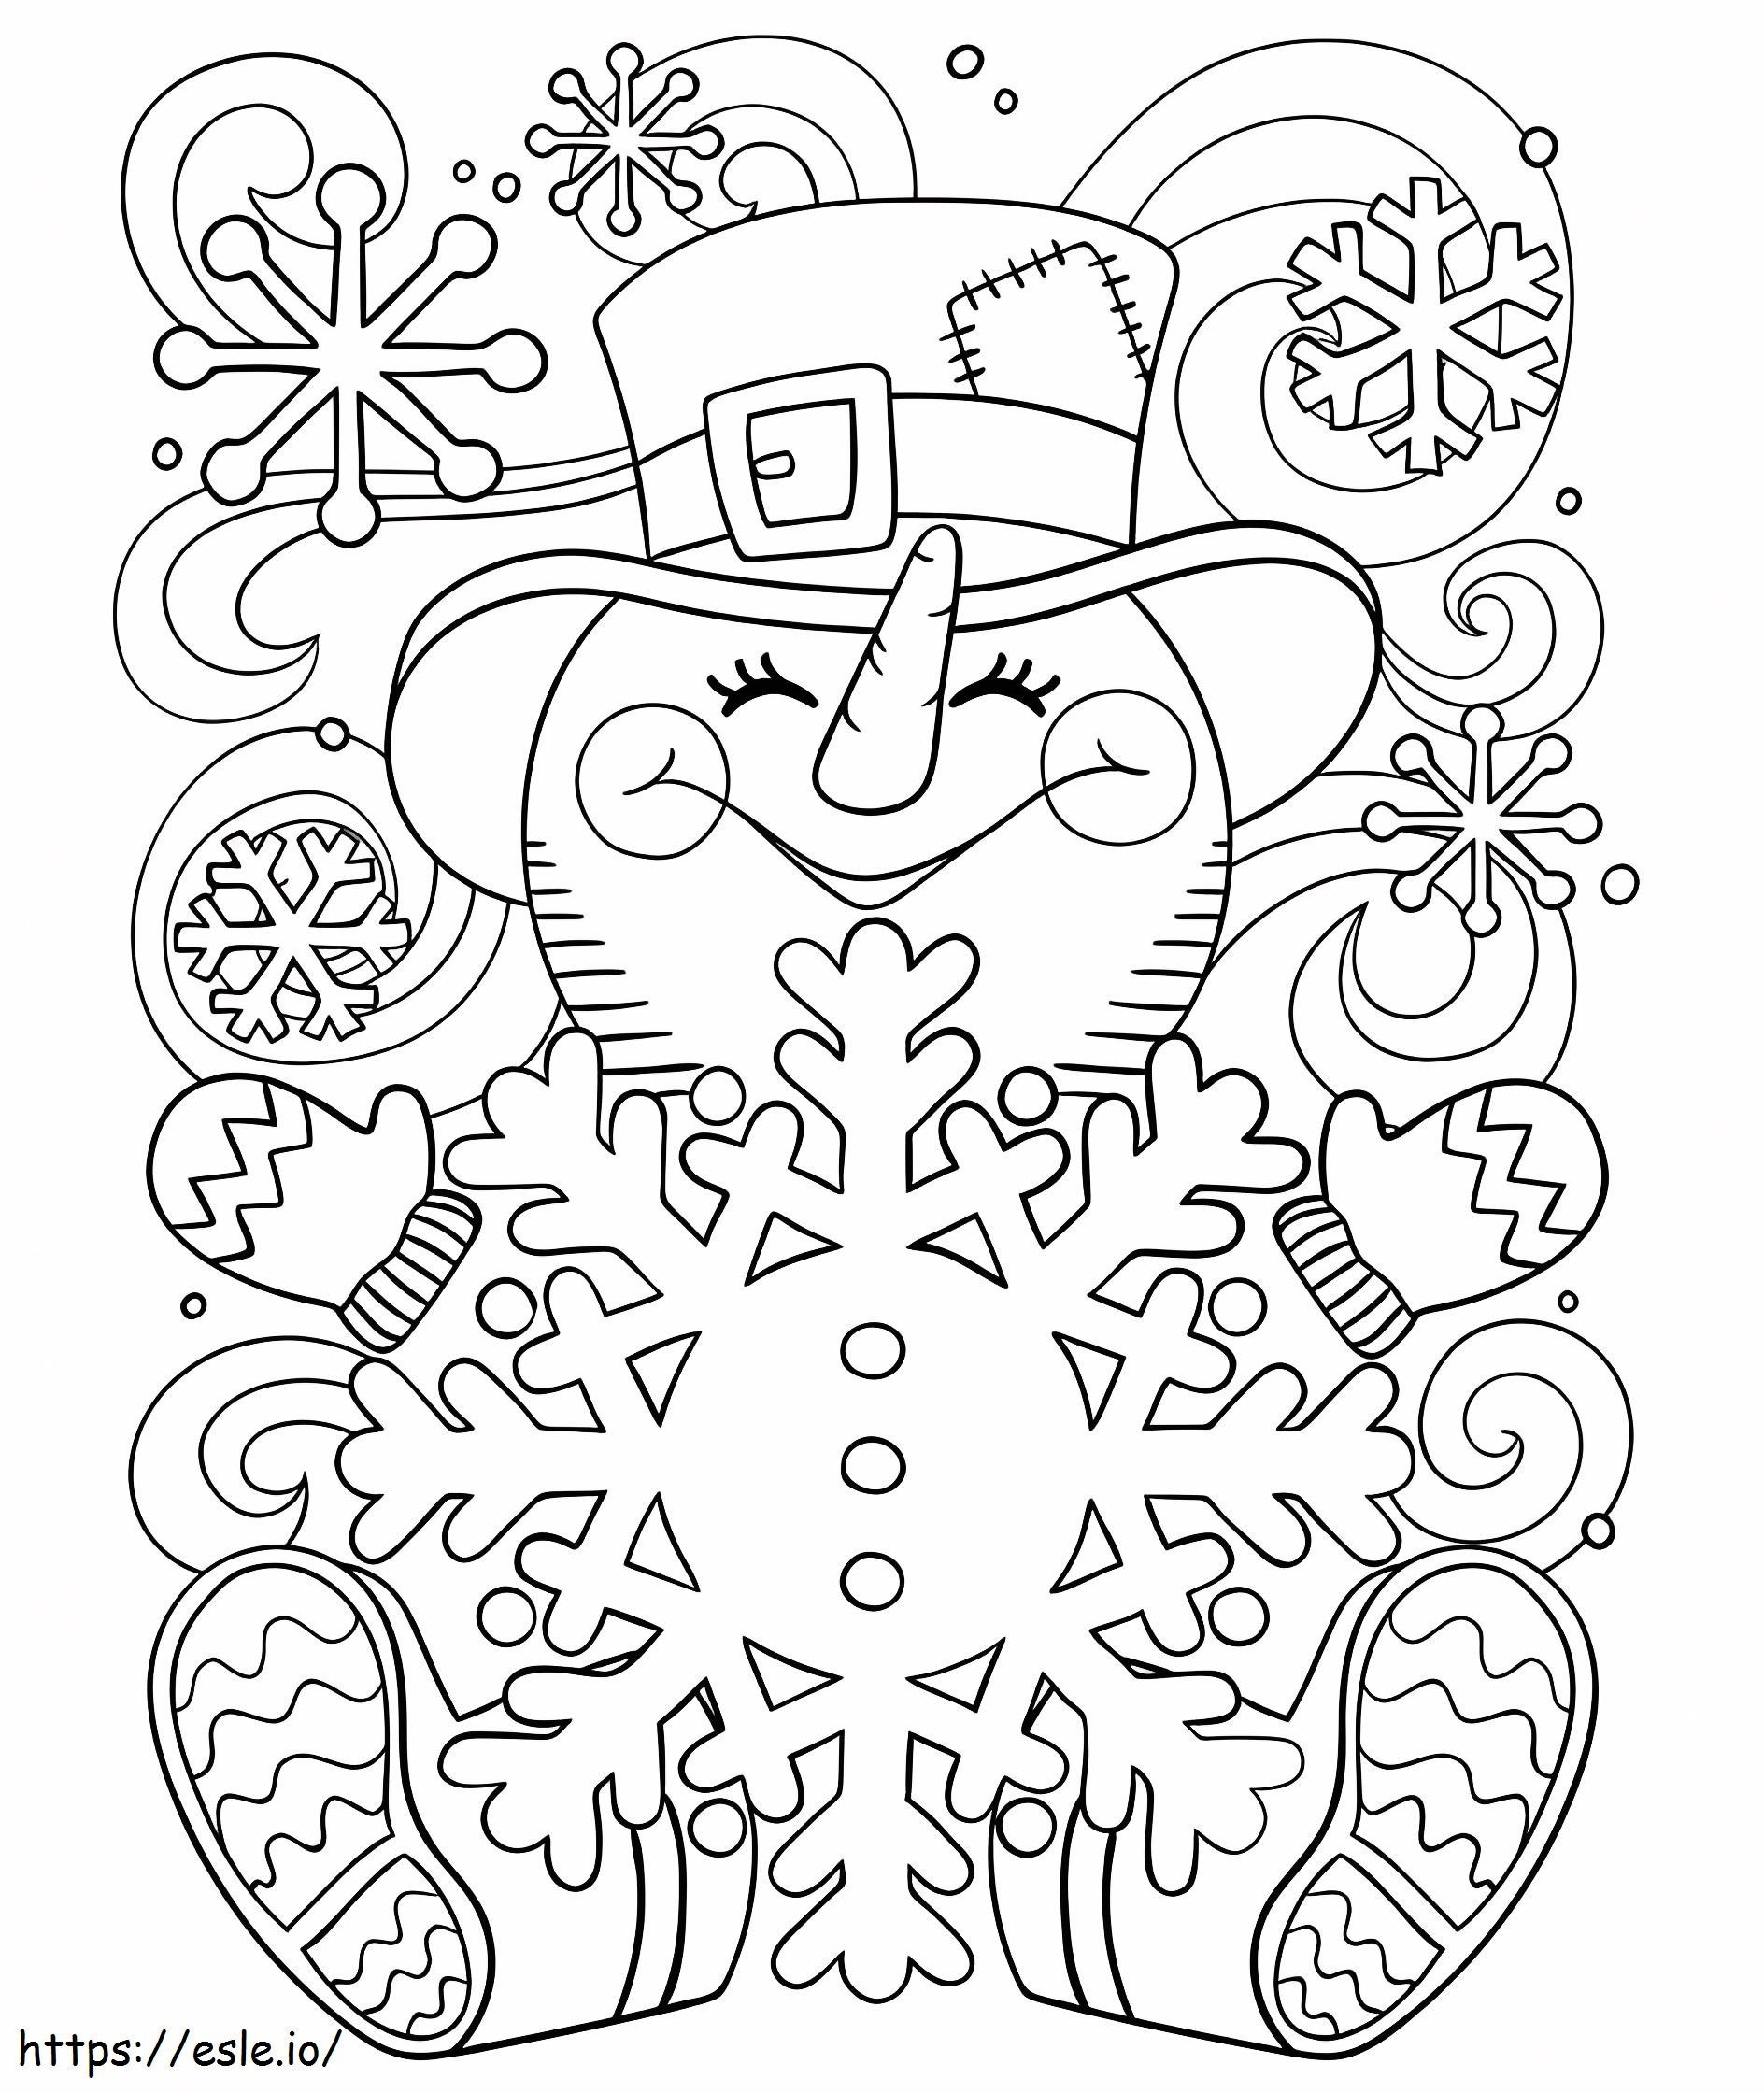 1559869087 Happy Snowman A4 coloring page